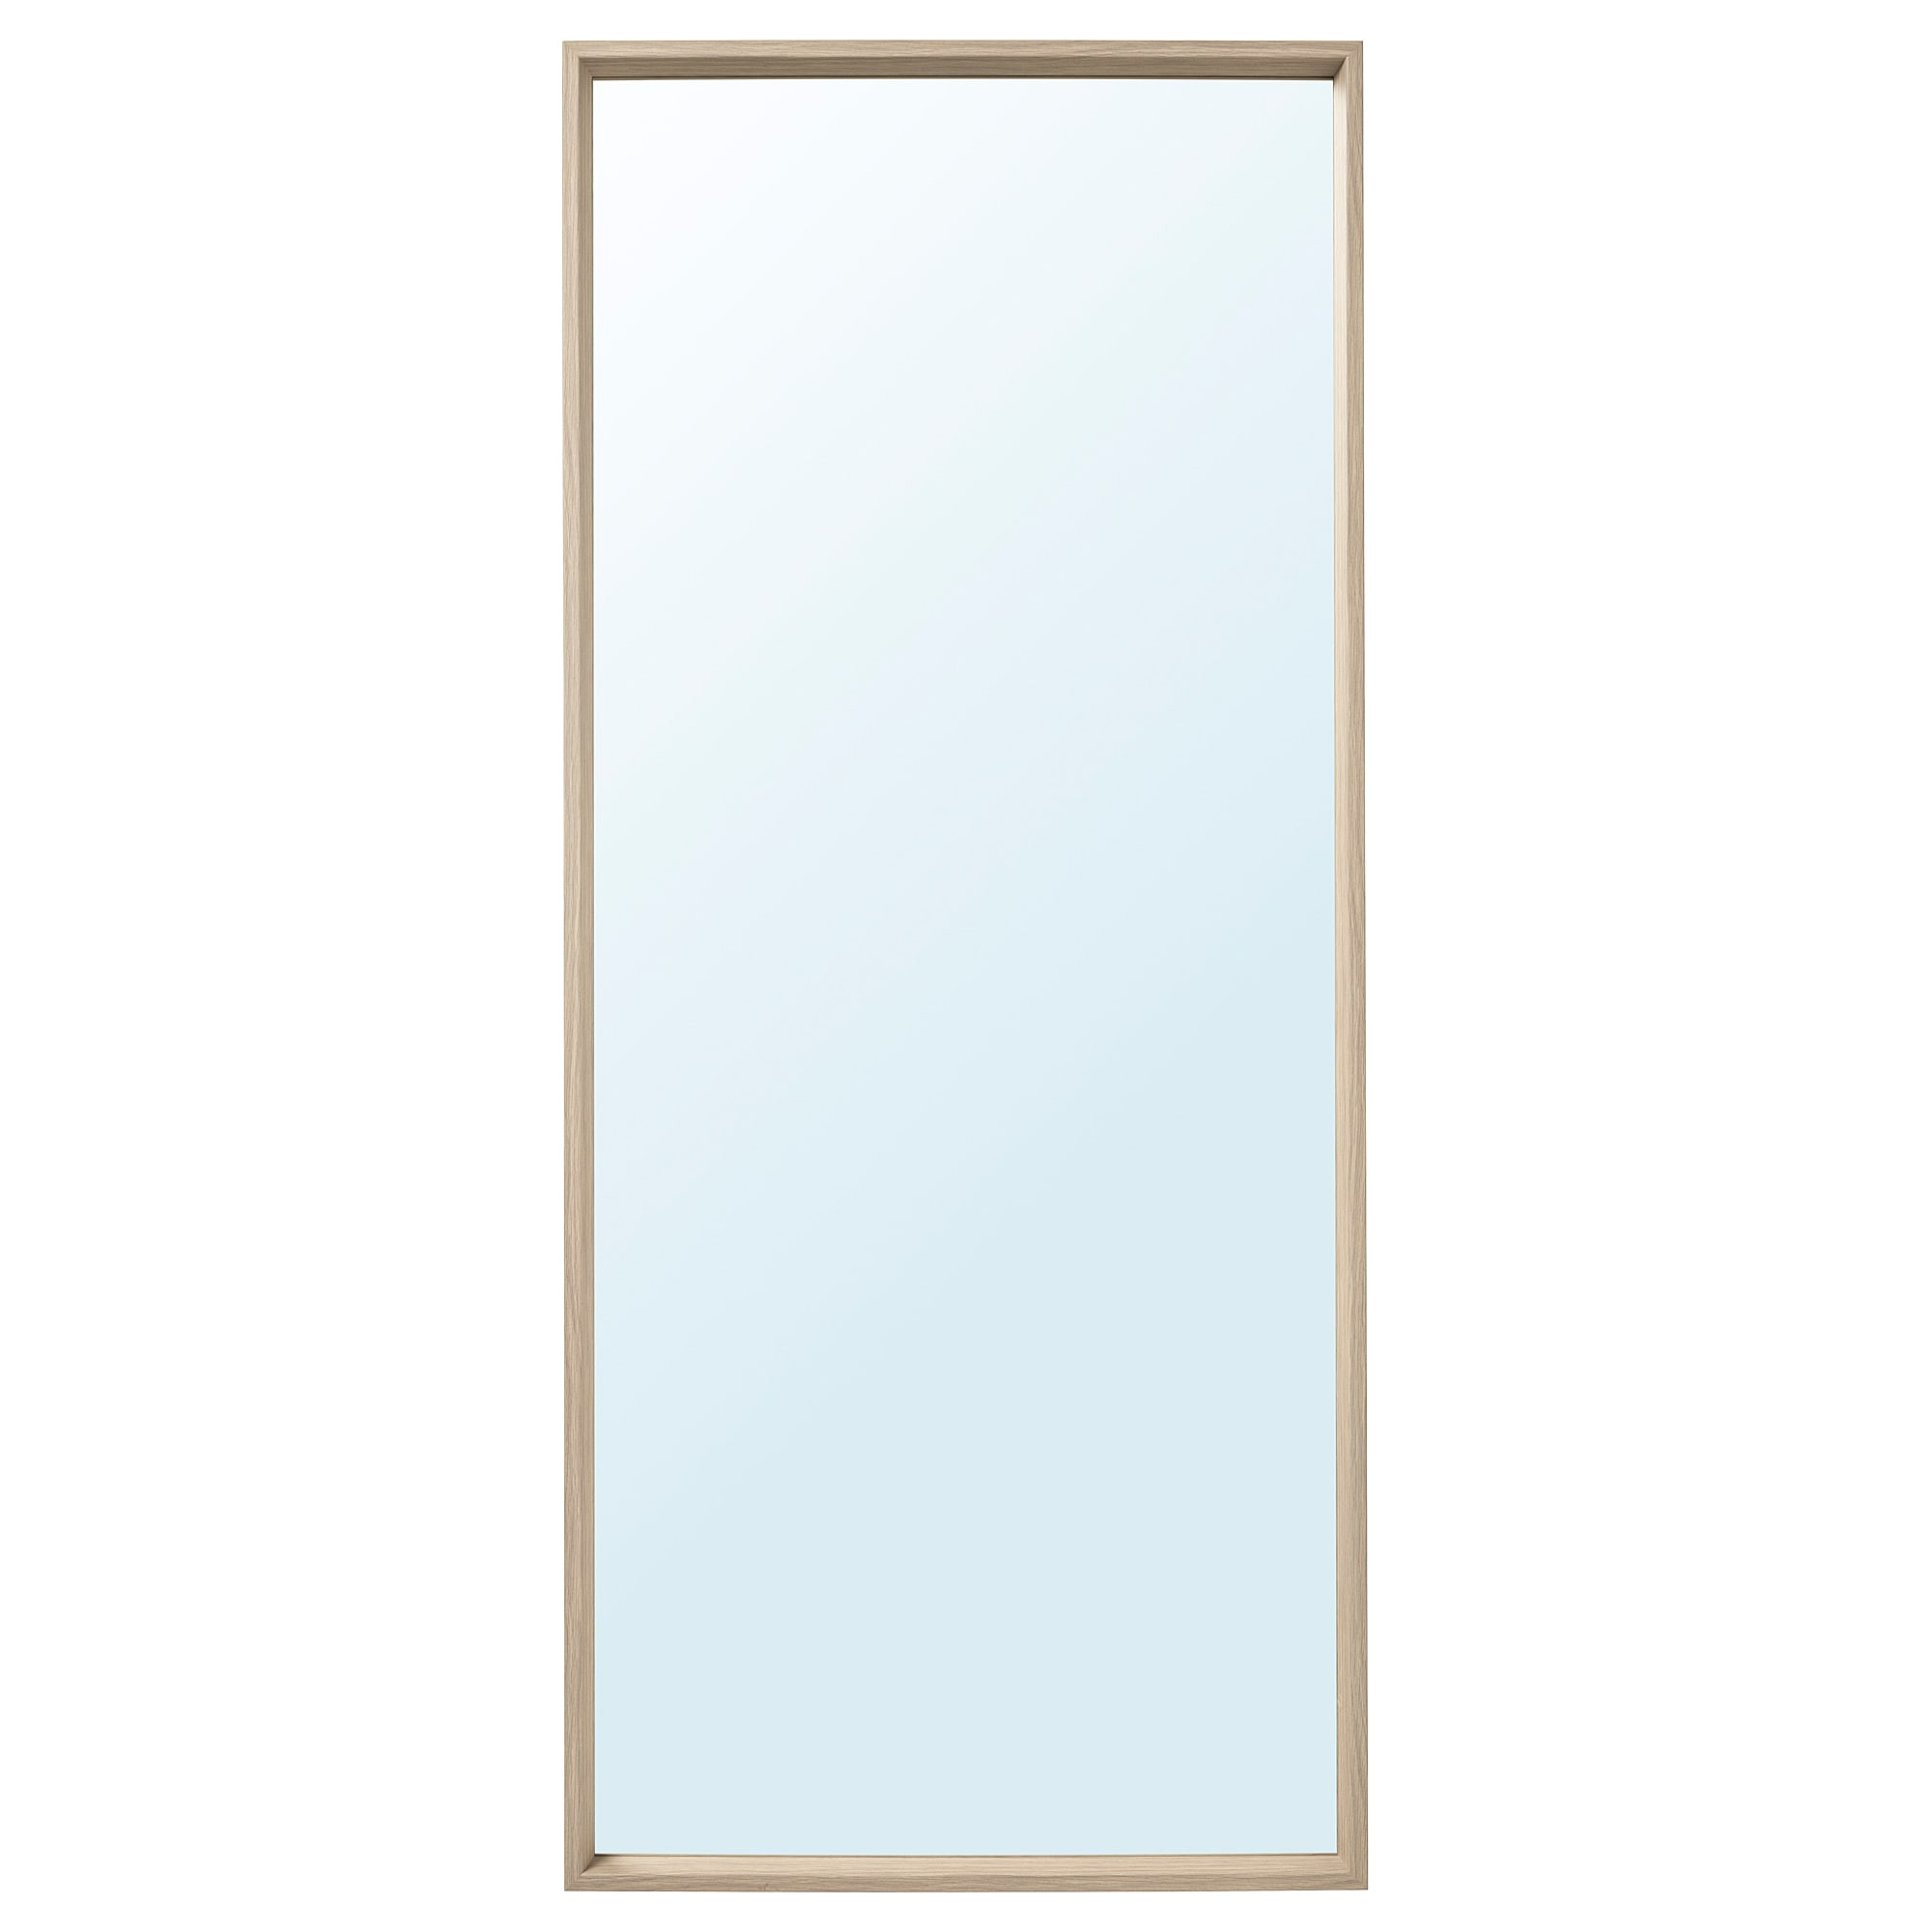 ikea nissedal mirror can be hung horizontally or vertically